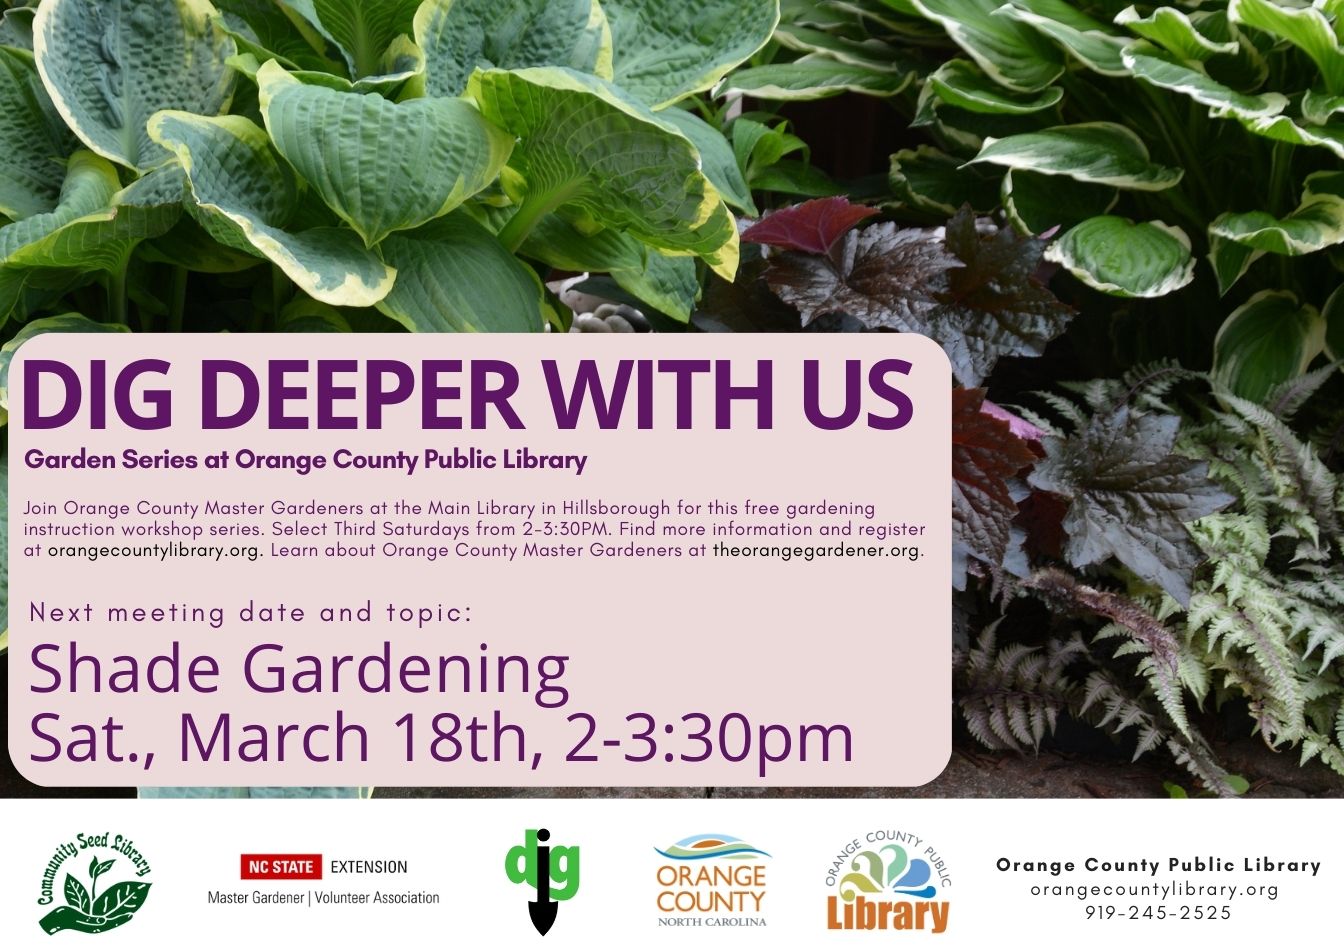 Dig Deeper with Us Gardening Series. This month's topic: Shade Gardening